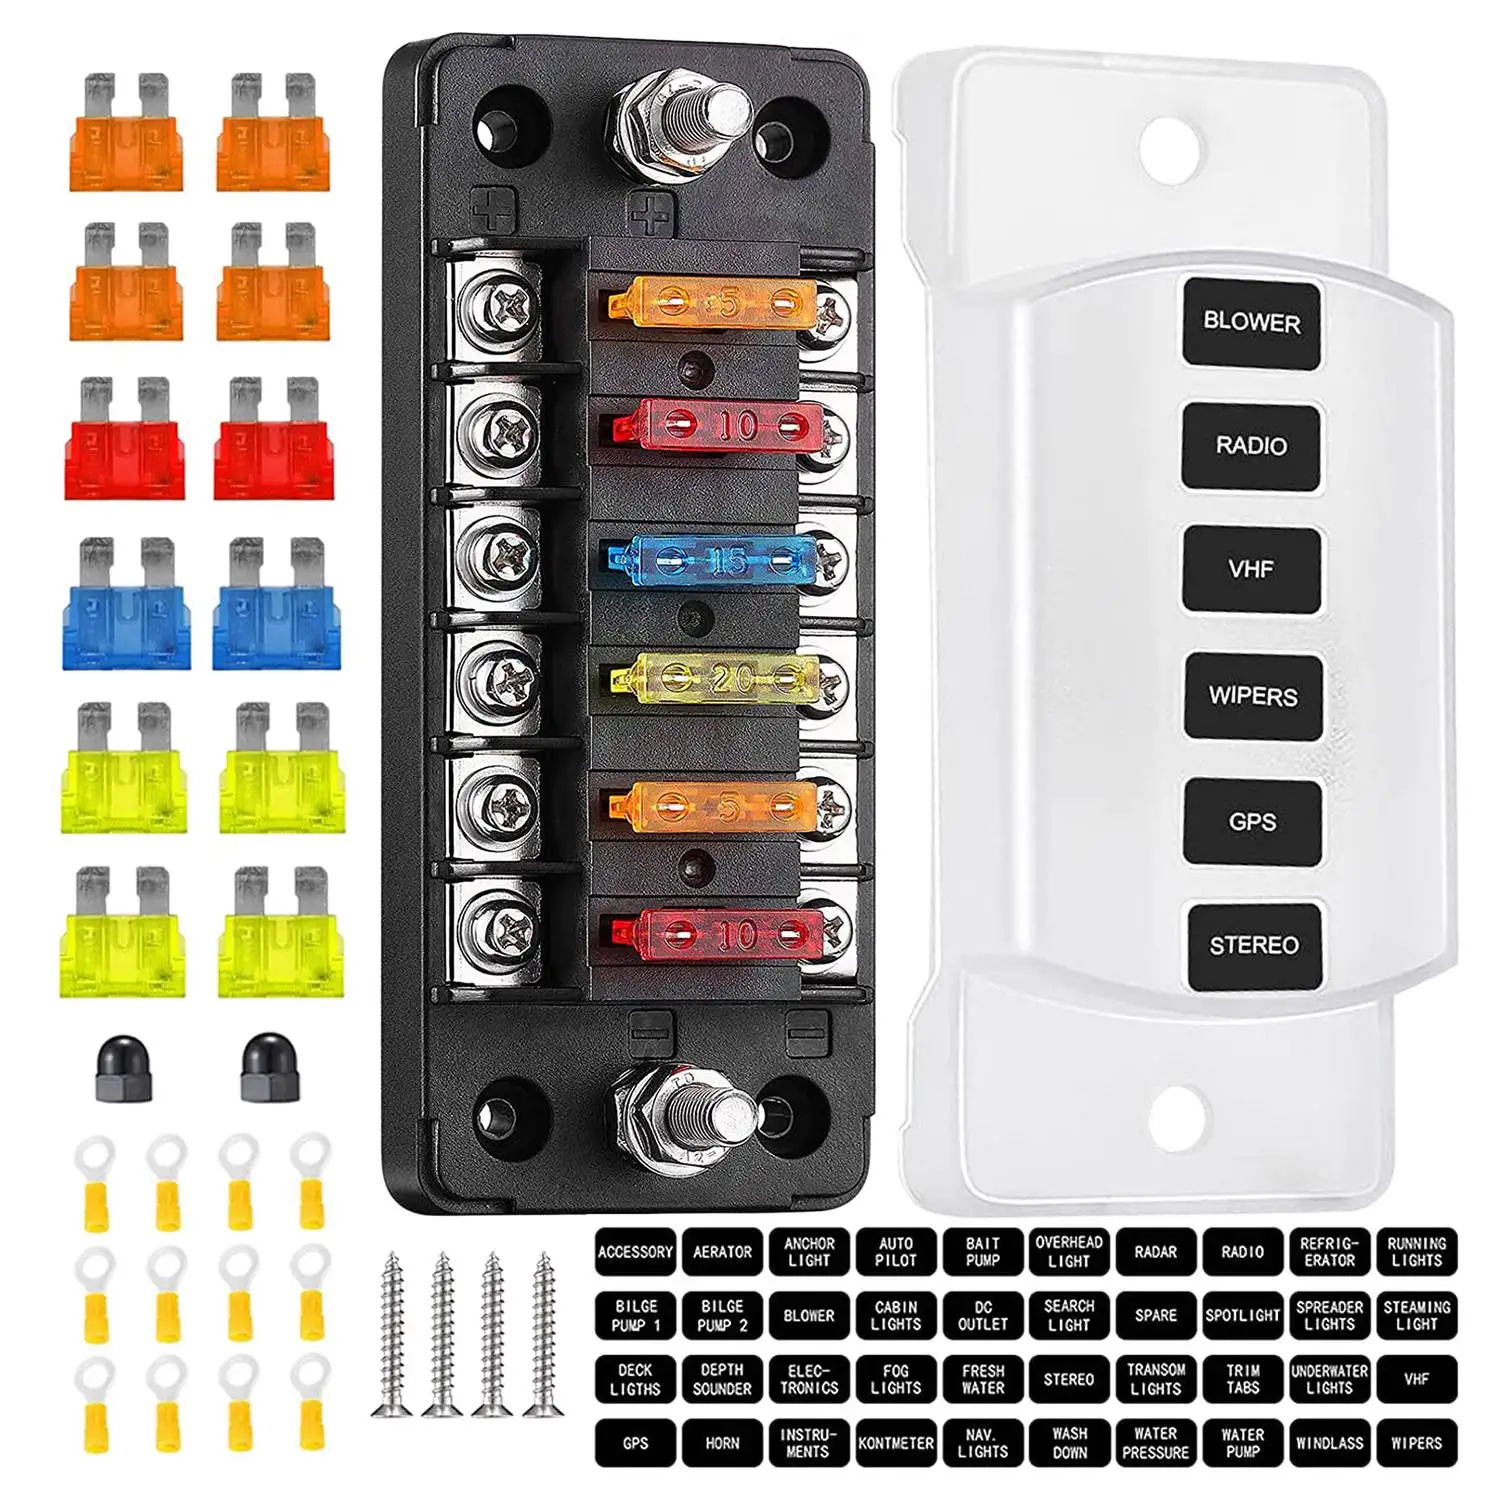 

6 Way Fuse Block Blade Fuse Box with Negative Bus - ATC/ATO for Boat Yacht Vehicle Auto RV Car Trailer Truck SUV